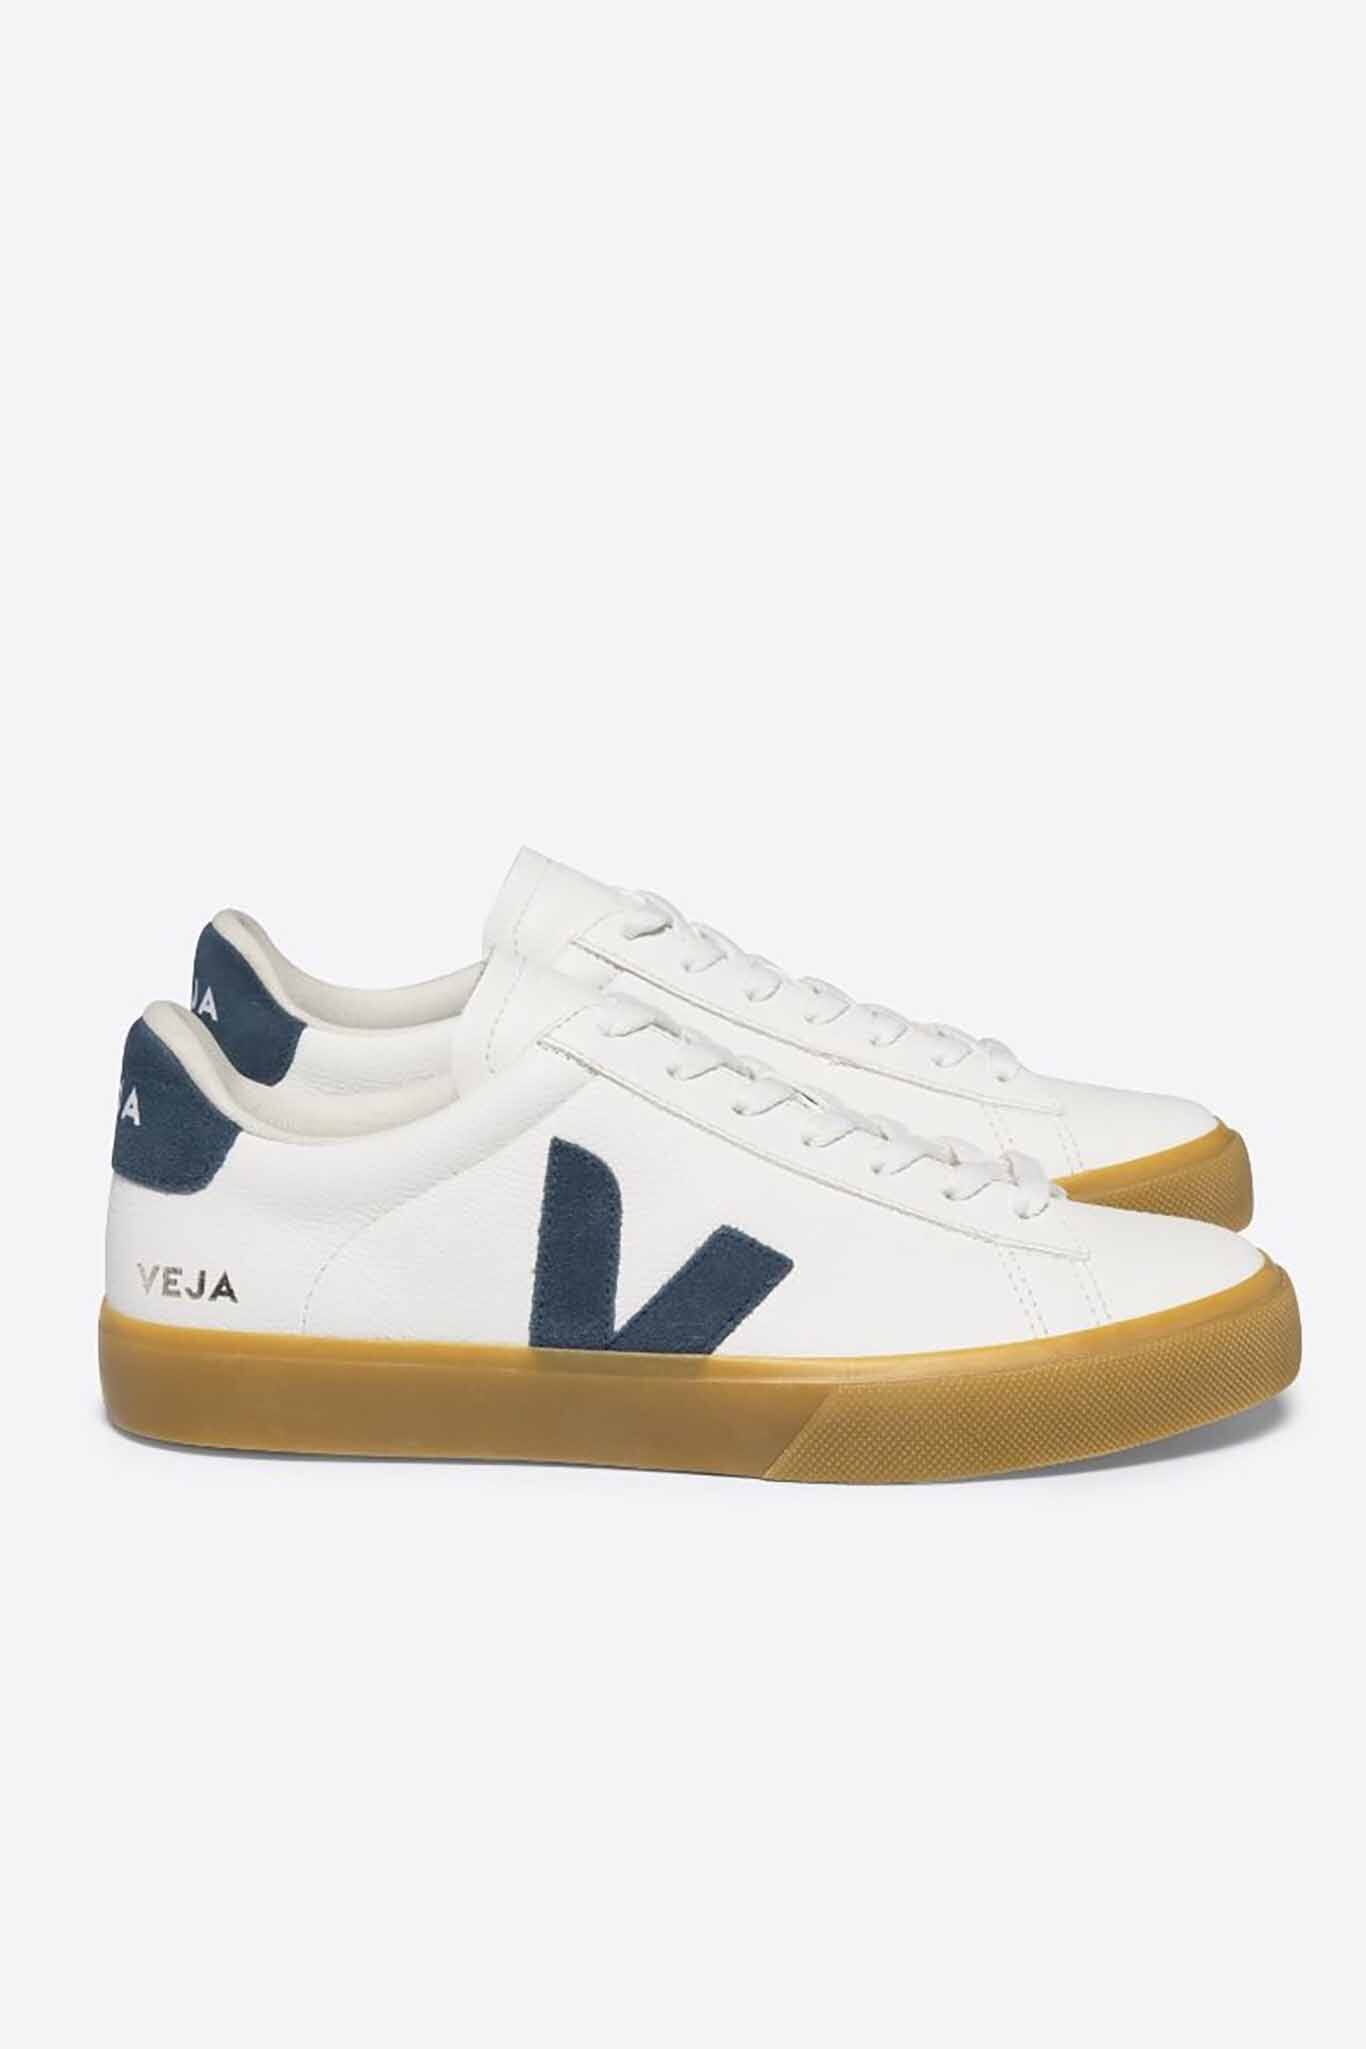 Veja - Campo Leather Sneakers Blue